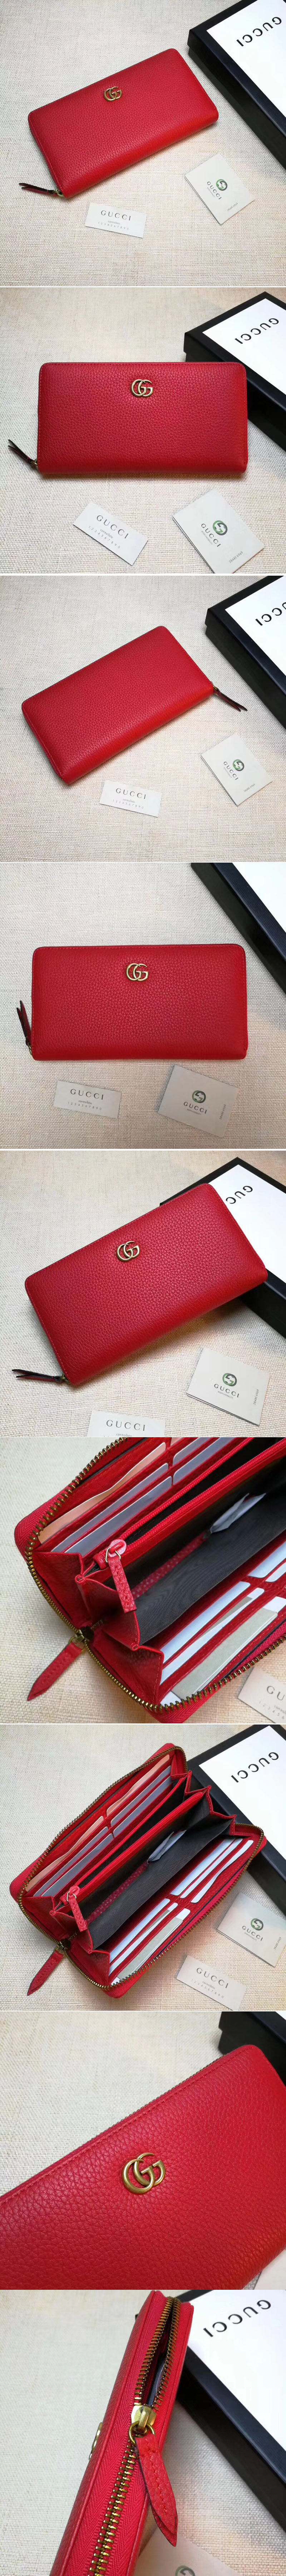 Replica Gucci 456117 GG Marmont leather zip around wallet Red